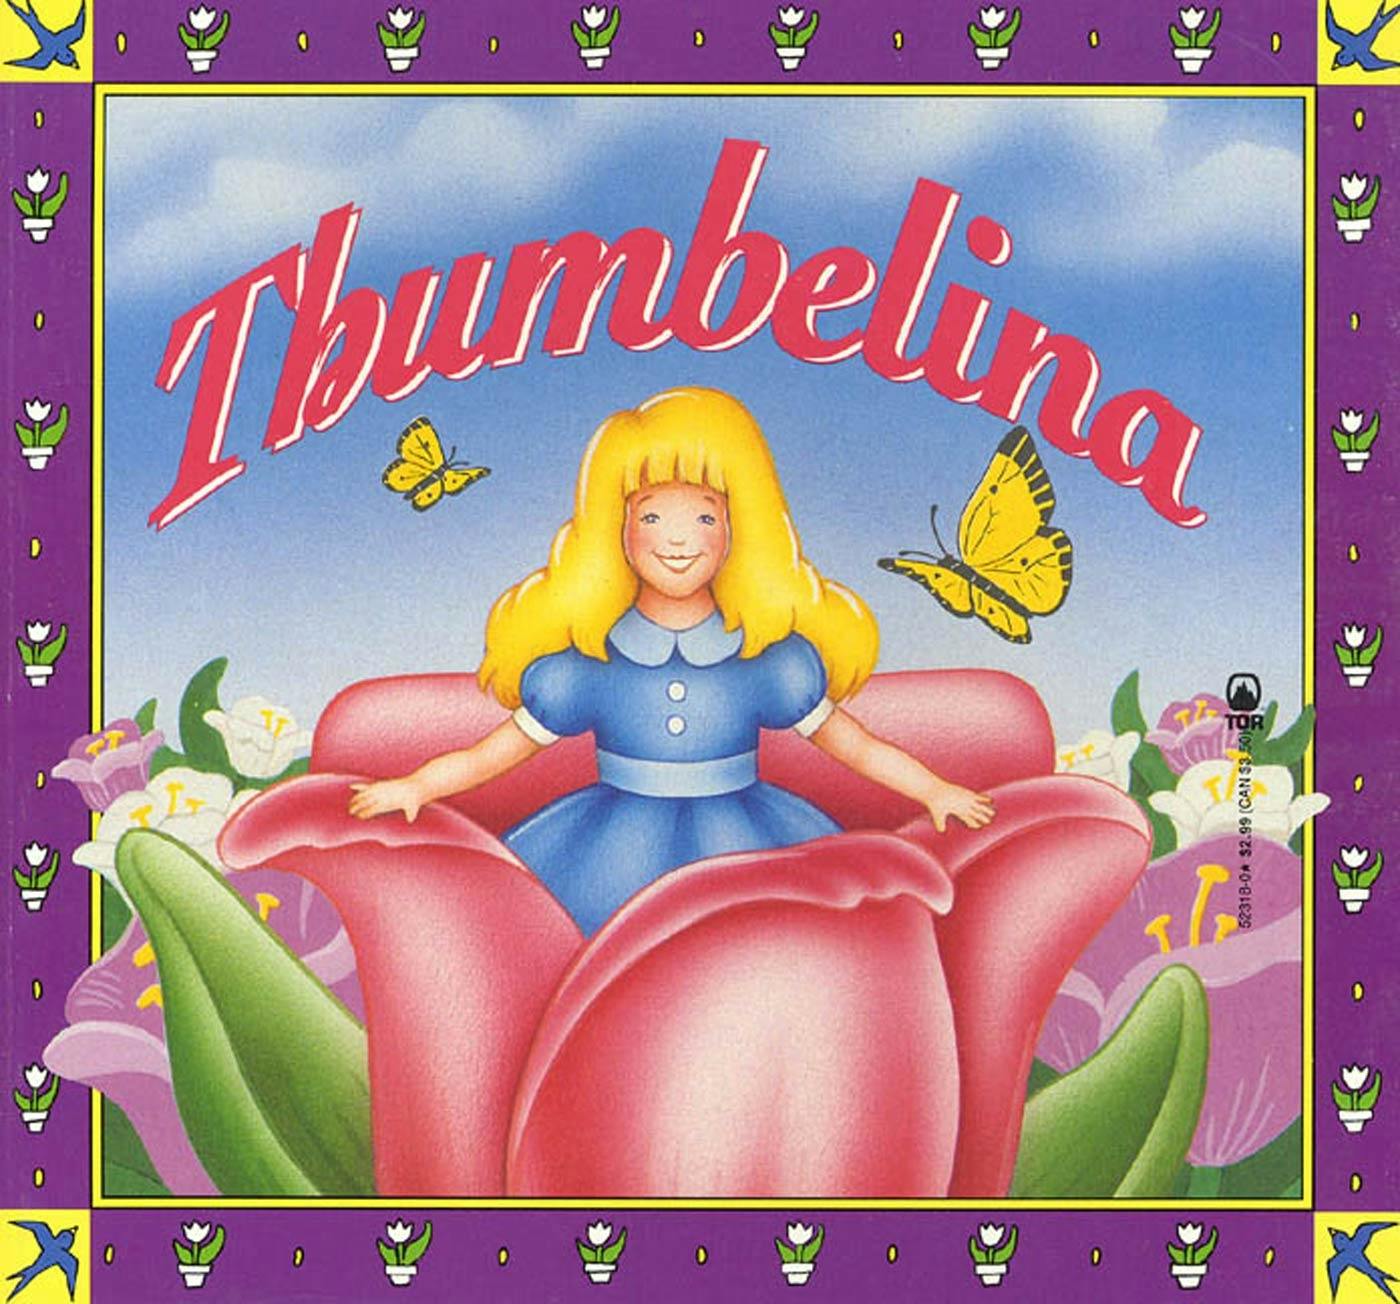 Cover for the book titled as: Thumbelina